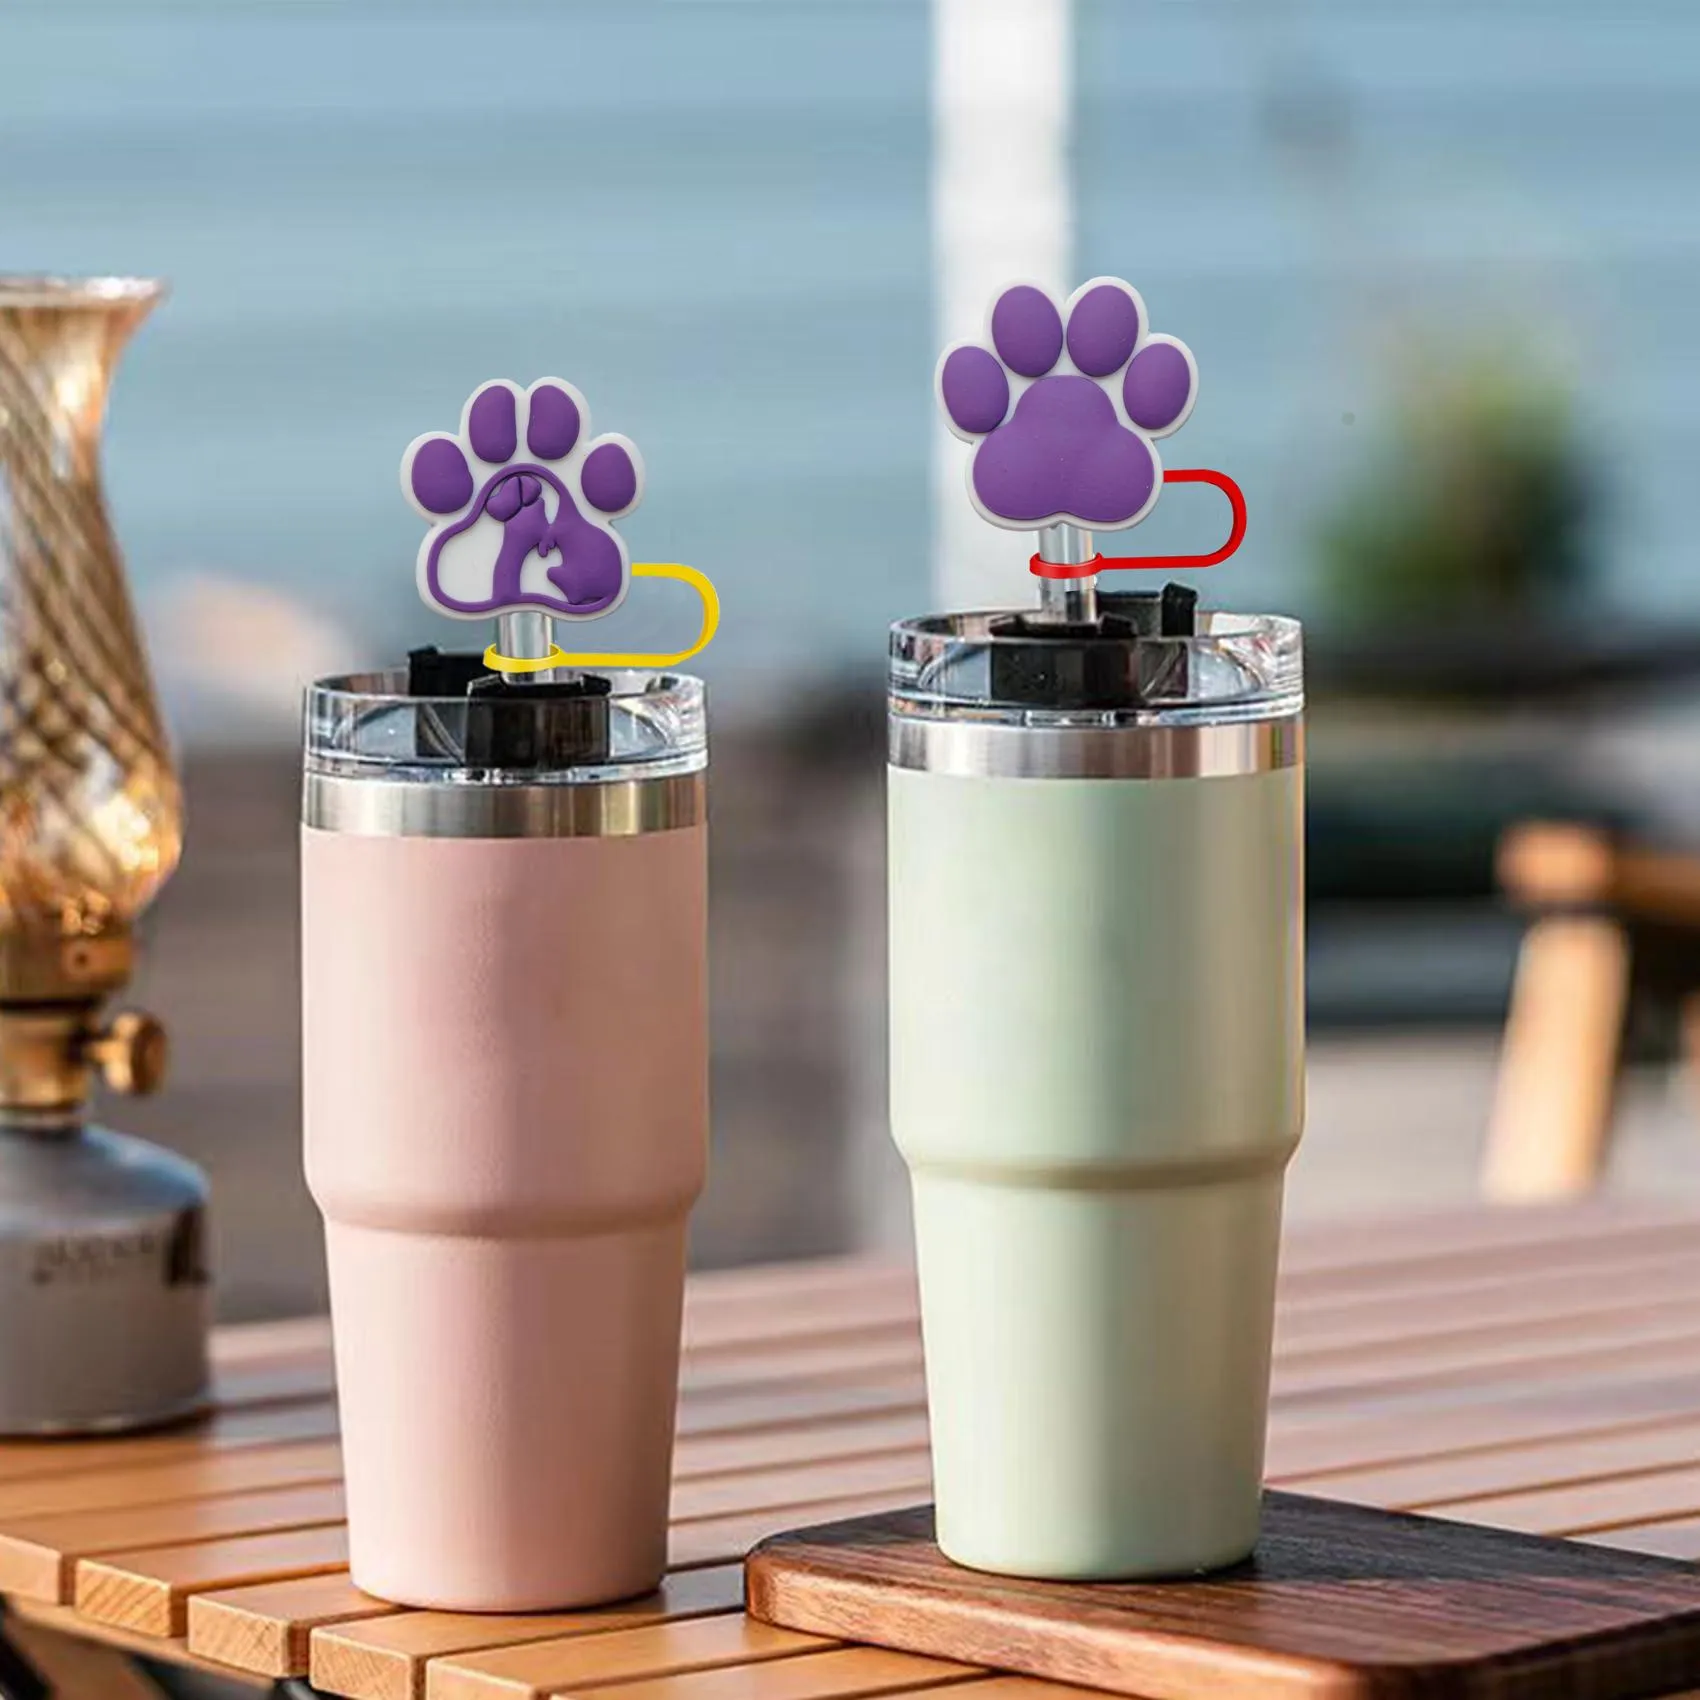 Drinking Sts Cute Seal St Er For Cups Ers Dust-Proof Protector Topper Reusable Tips Lids 40 30 20 Oz Funny Tumbler Accessories Man W Otcql